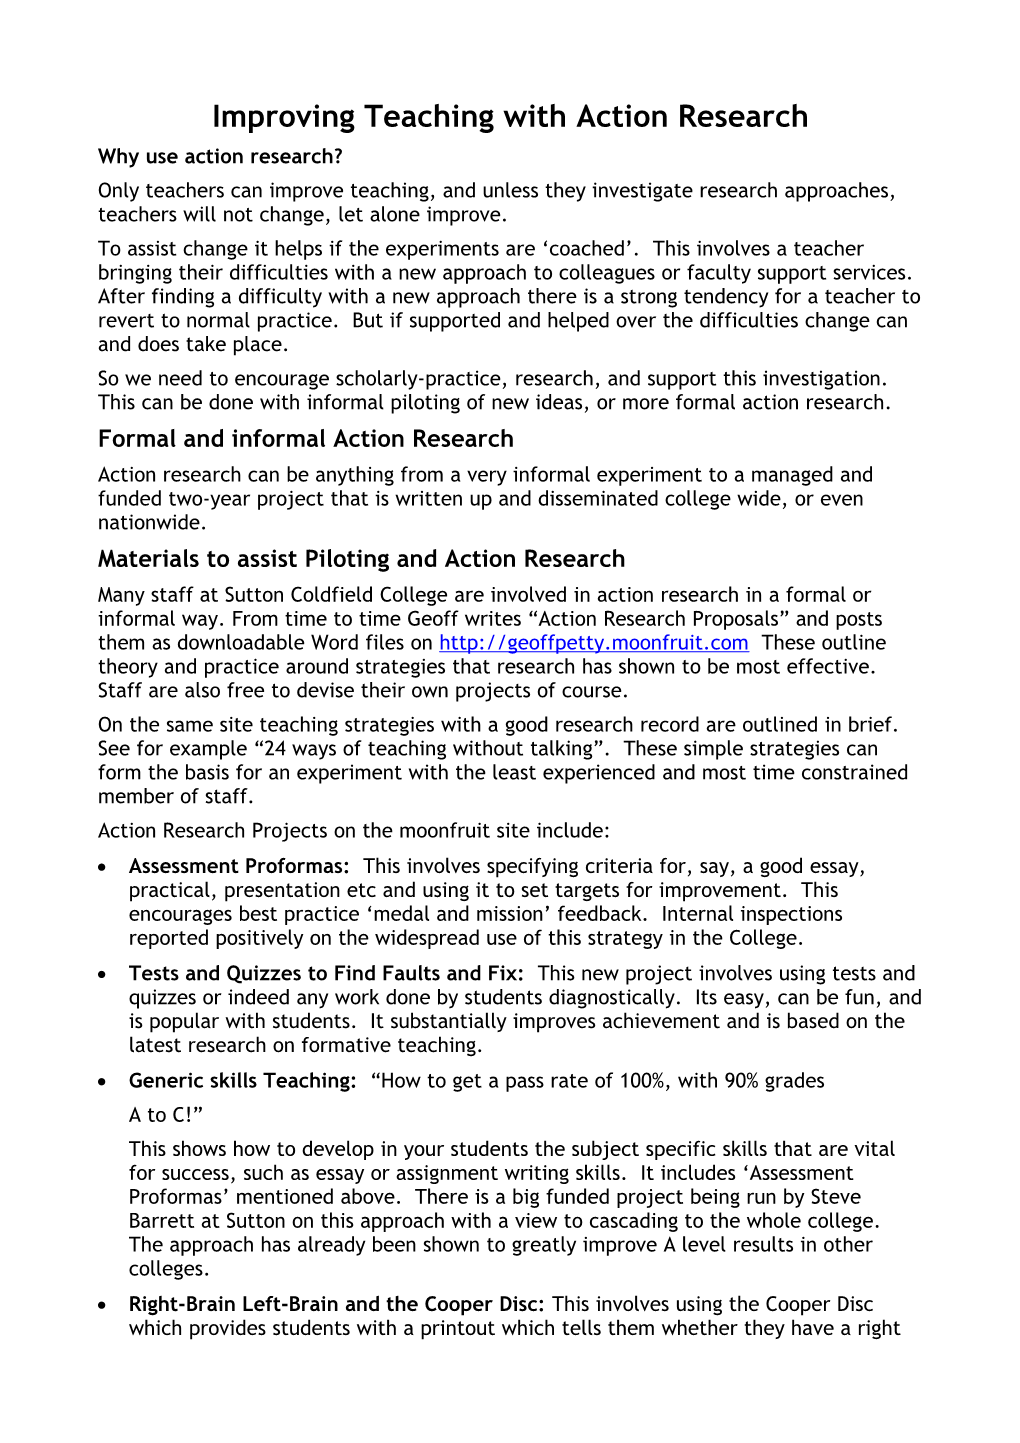 Action Research Proposals